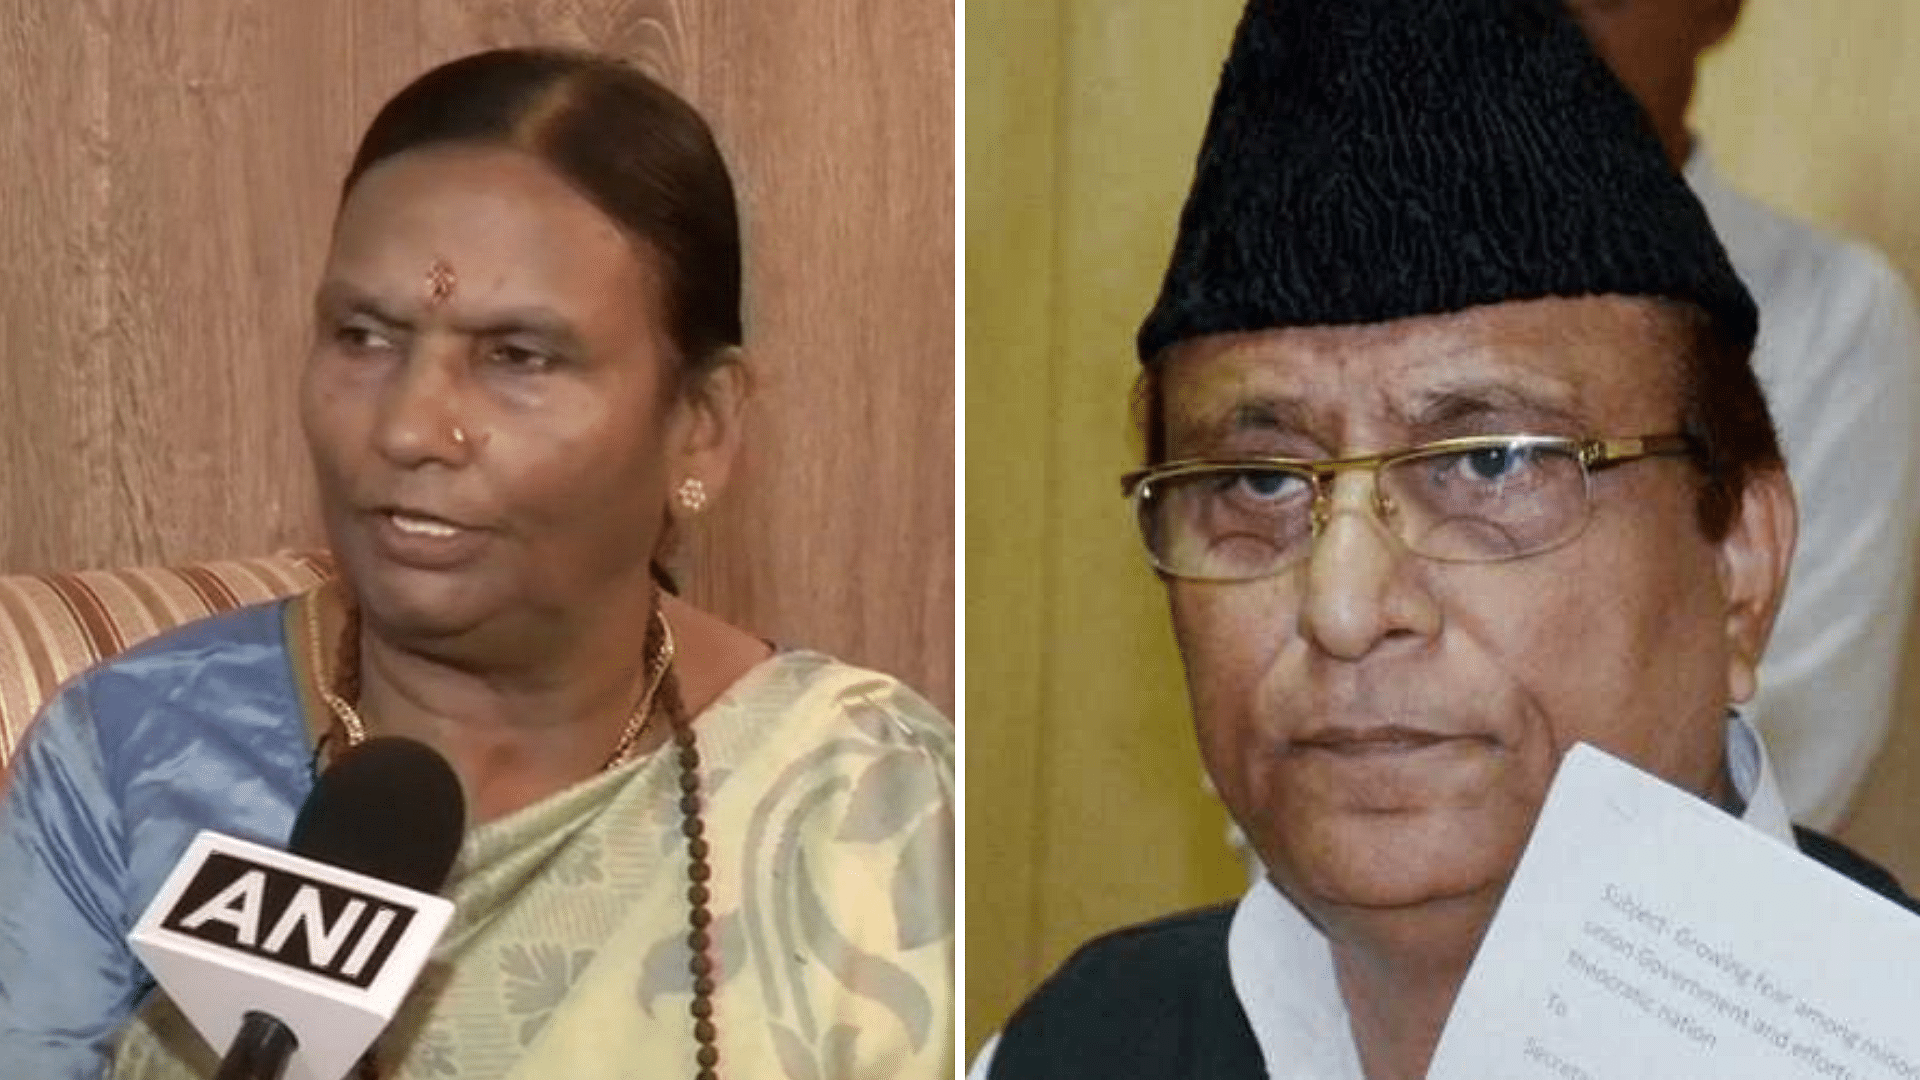 Rama Devi, who was on the receiving end of sexist remarks from Samajwadi Party MP Mohd Azam Khan in Parliament on Thursday, 25 July, has reacted strongly to the incident, demanding an apology from him.